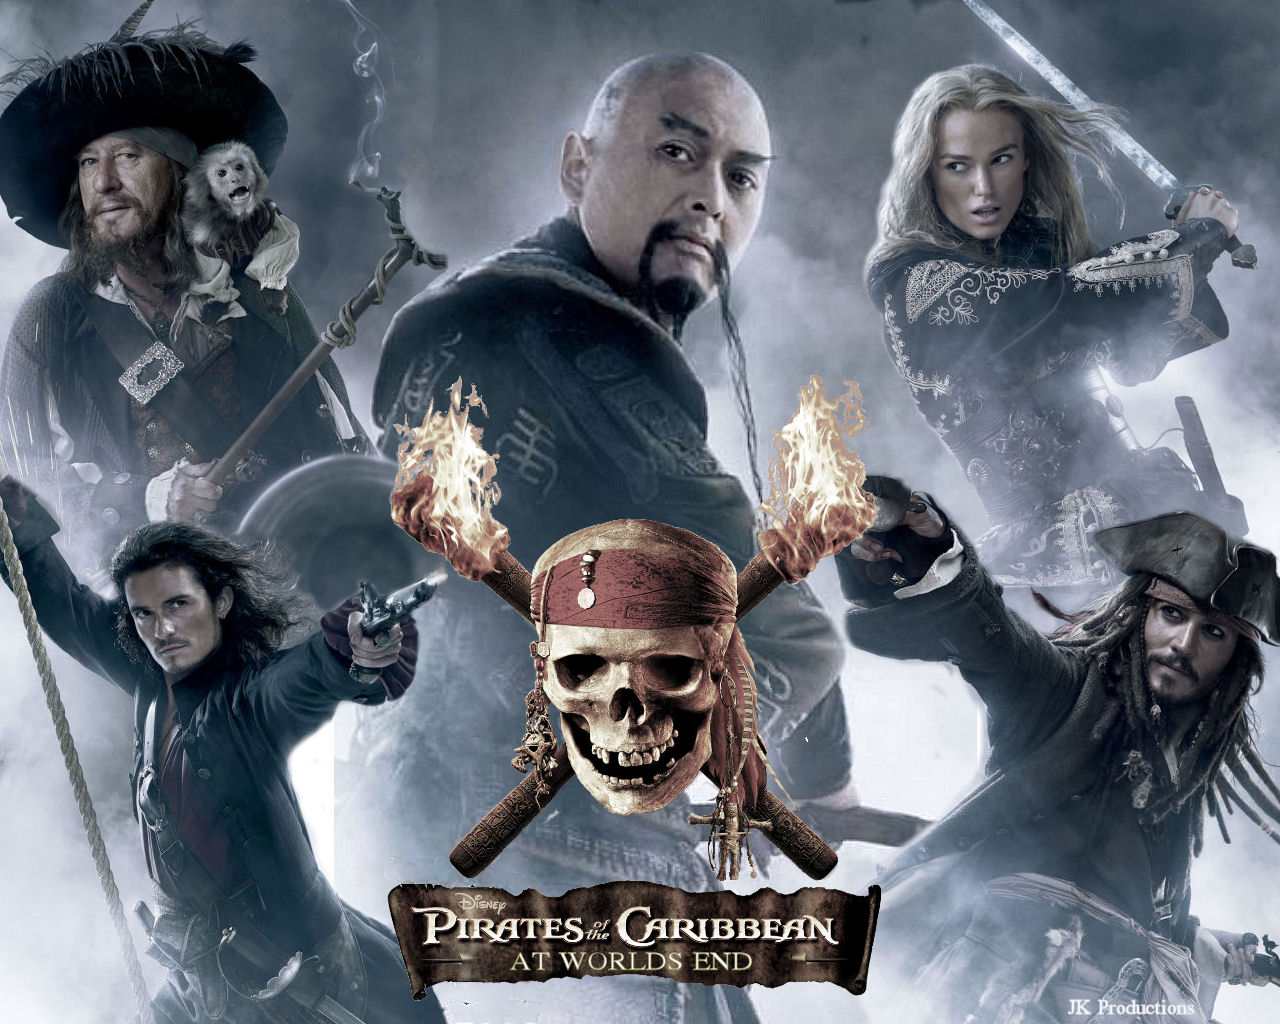 Pirates Of The Caribbean Desktop Made With 260227 Wallpaper Pirates Of Caribbean Wallpaper At World's End HD Wallpaper